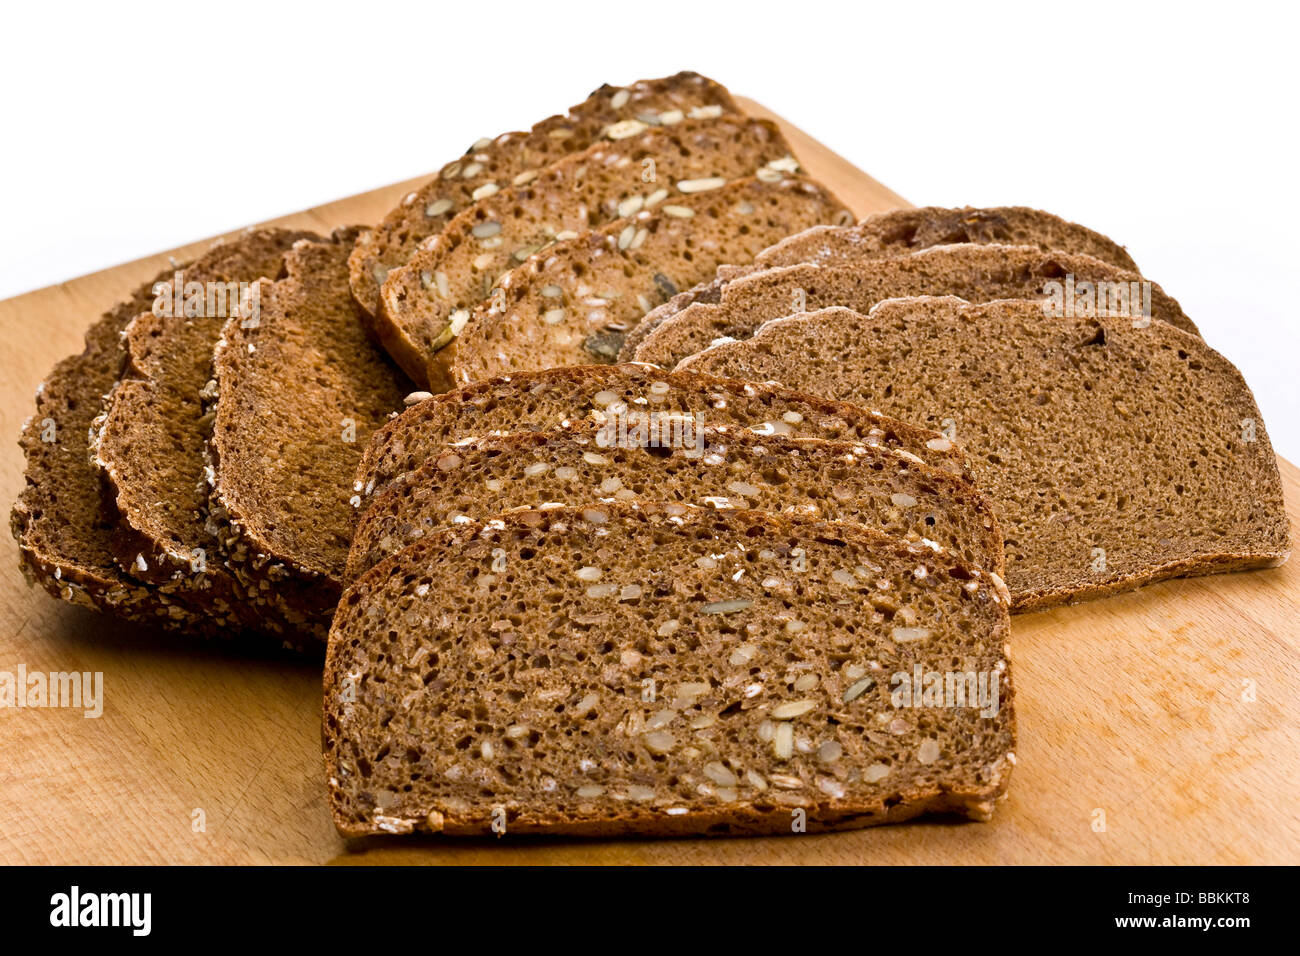 Slices of different sorts of rye bread Stock Photo